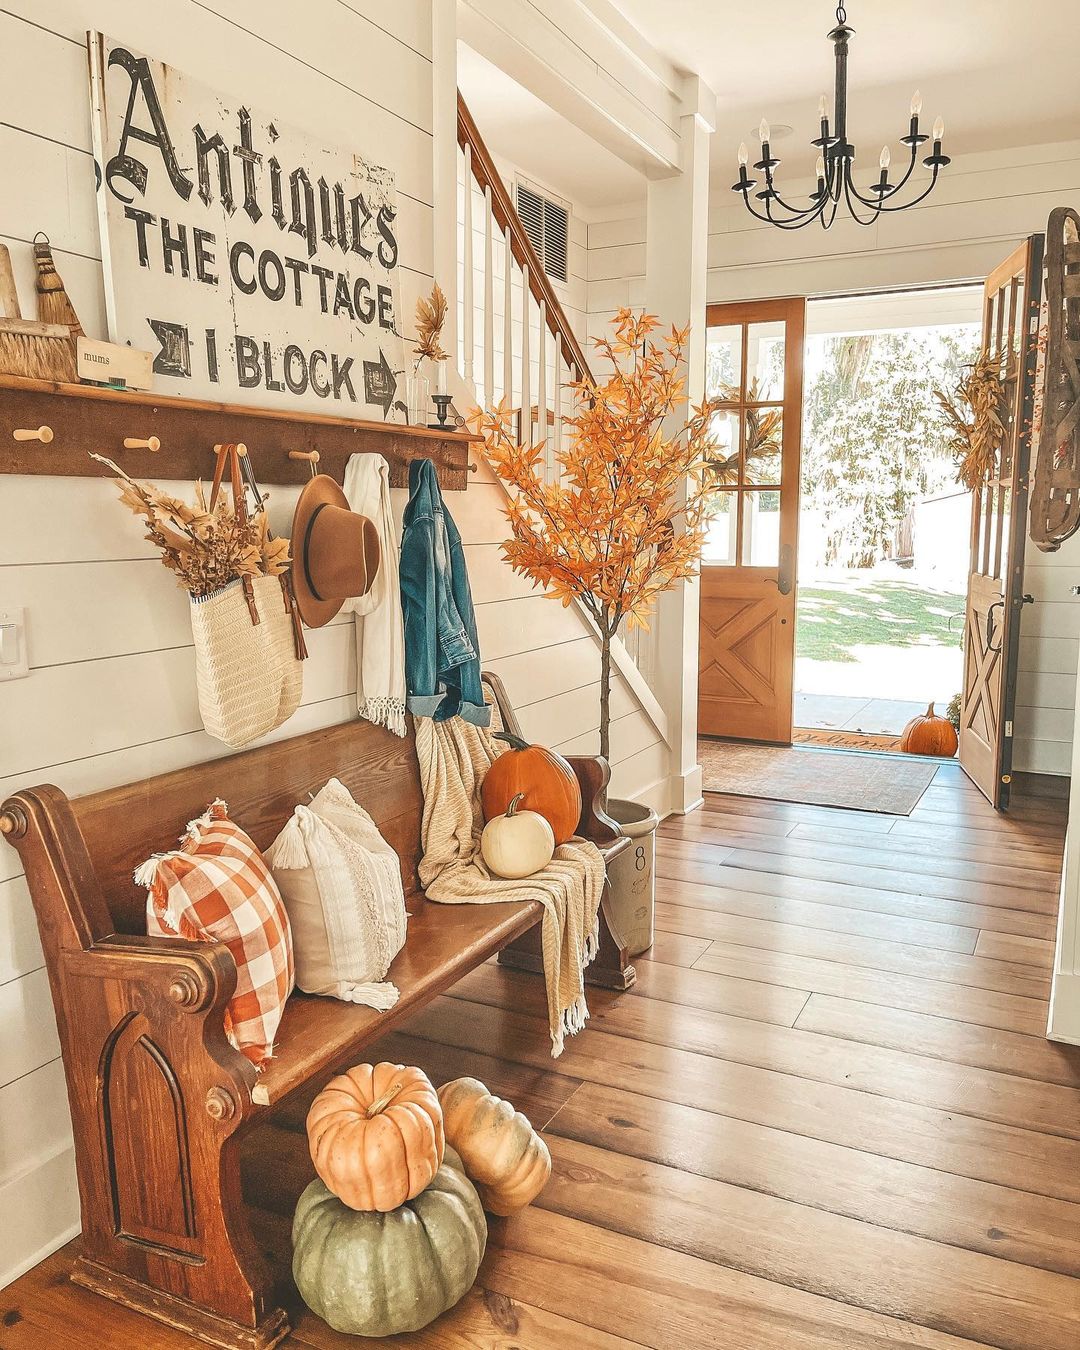 A farmhouse-style entryway with a bench, pegboard for coats and hats, and an open front door. Photo by Instagram user @lakefrontfarmhouse.